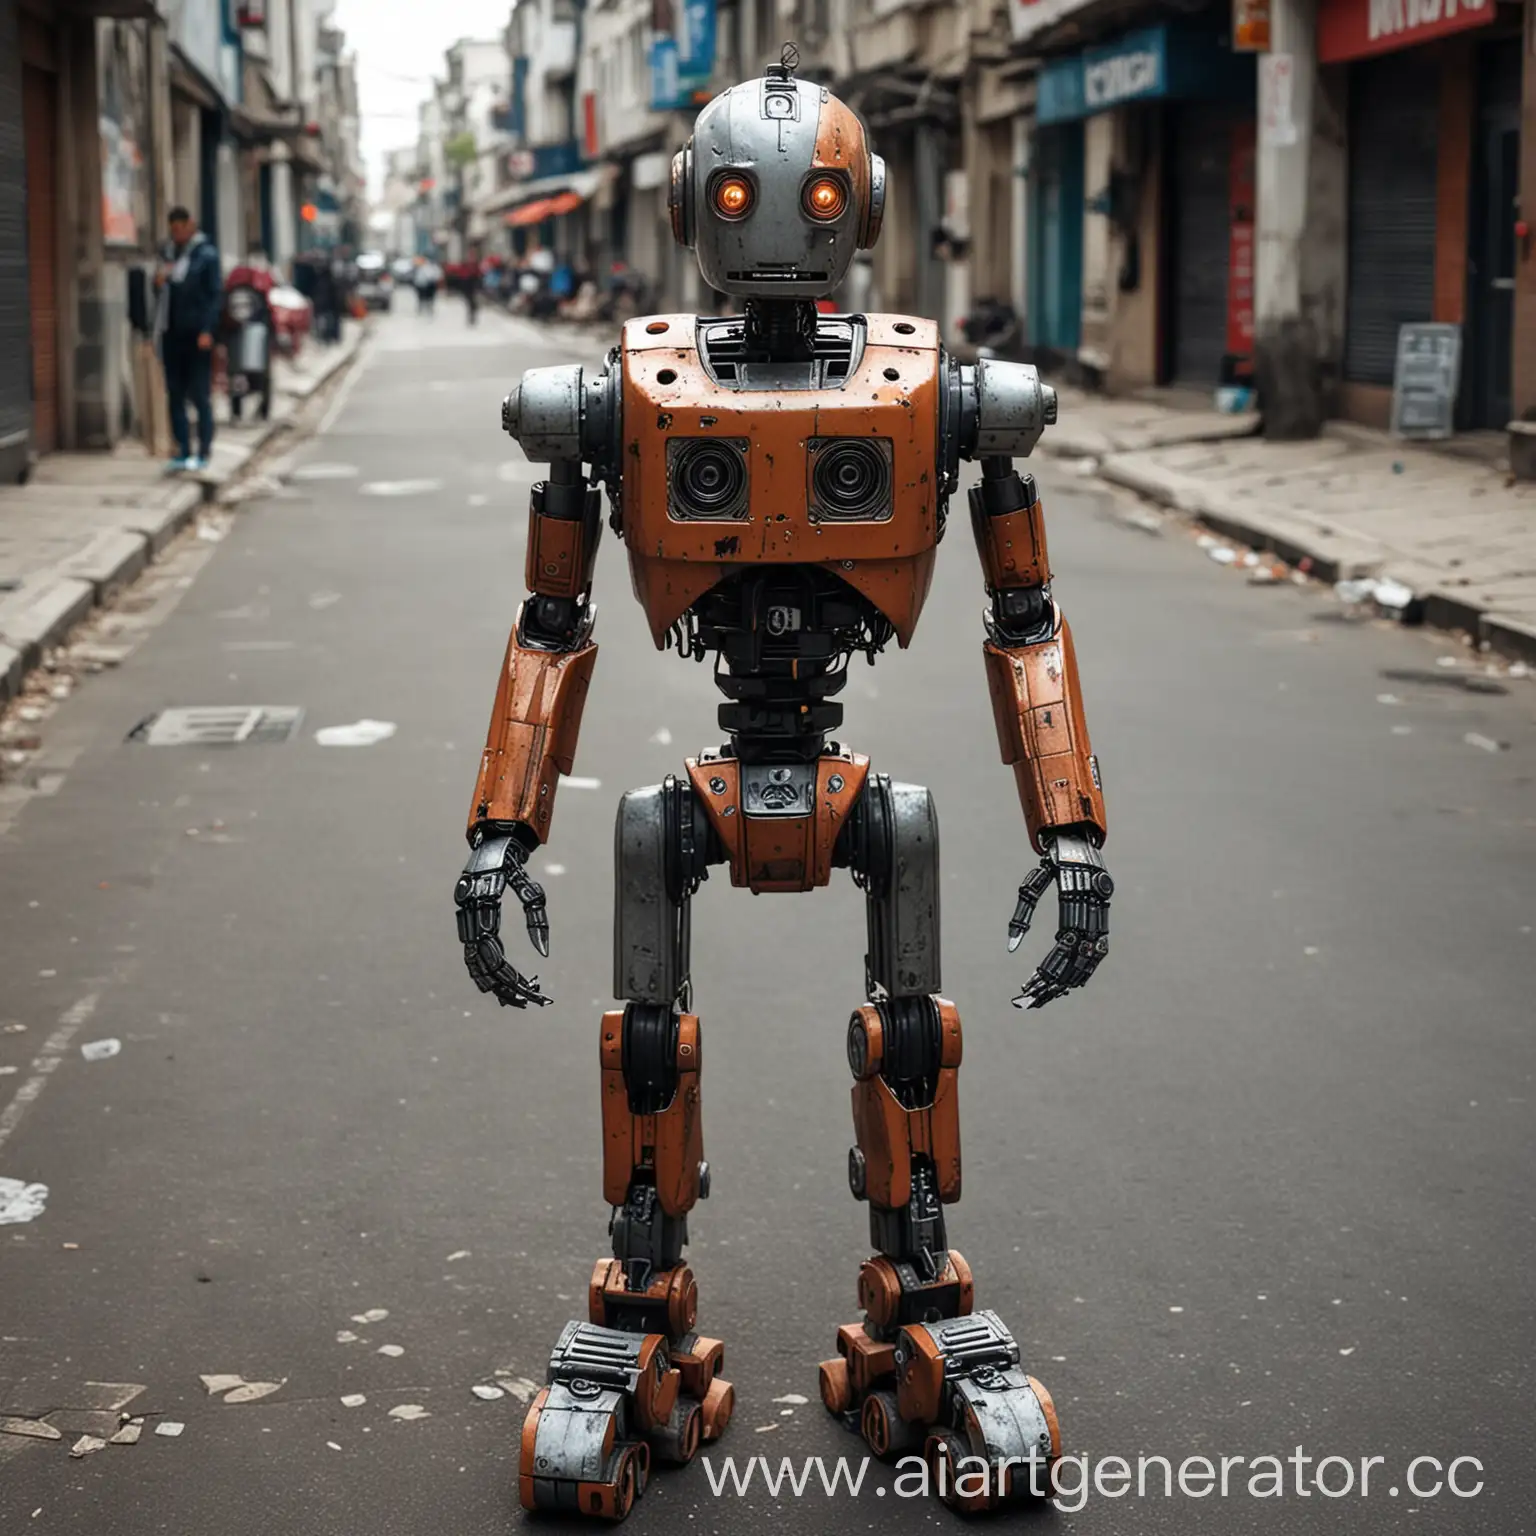 Urban-Scene-Fedy-the-Robot-Stands-Tall-in-City-Street